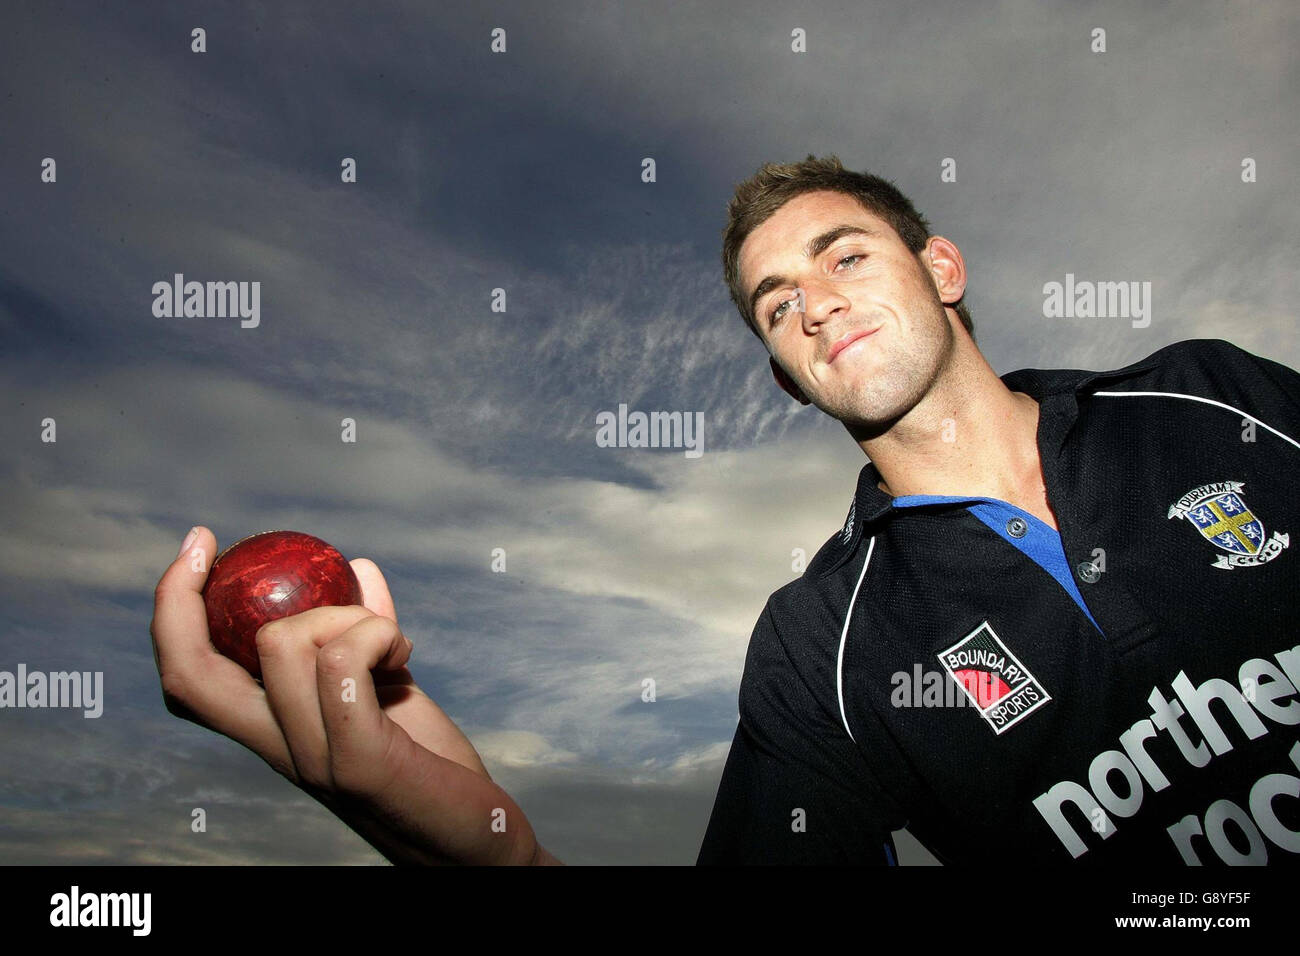 Durham bowler Liam Plunkett at the County Ground, Chester-le-Street, Thursday October 20, 2005. Plunkett has been selected to join the England squad for the tour to Pakistan. Watch for PA story. PRESS ASSOCIATION Photo. Photo credit should read: Owen Humphreys/PA. Stock Photo